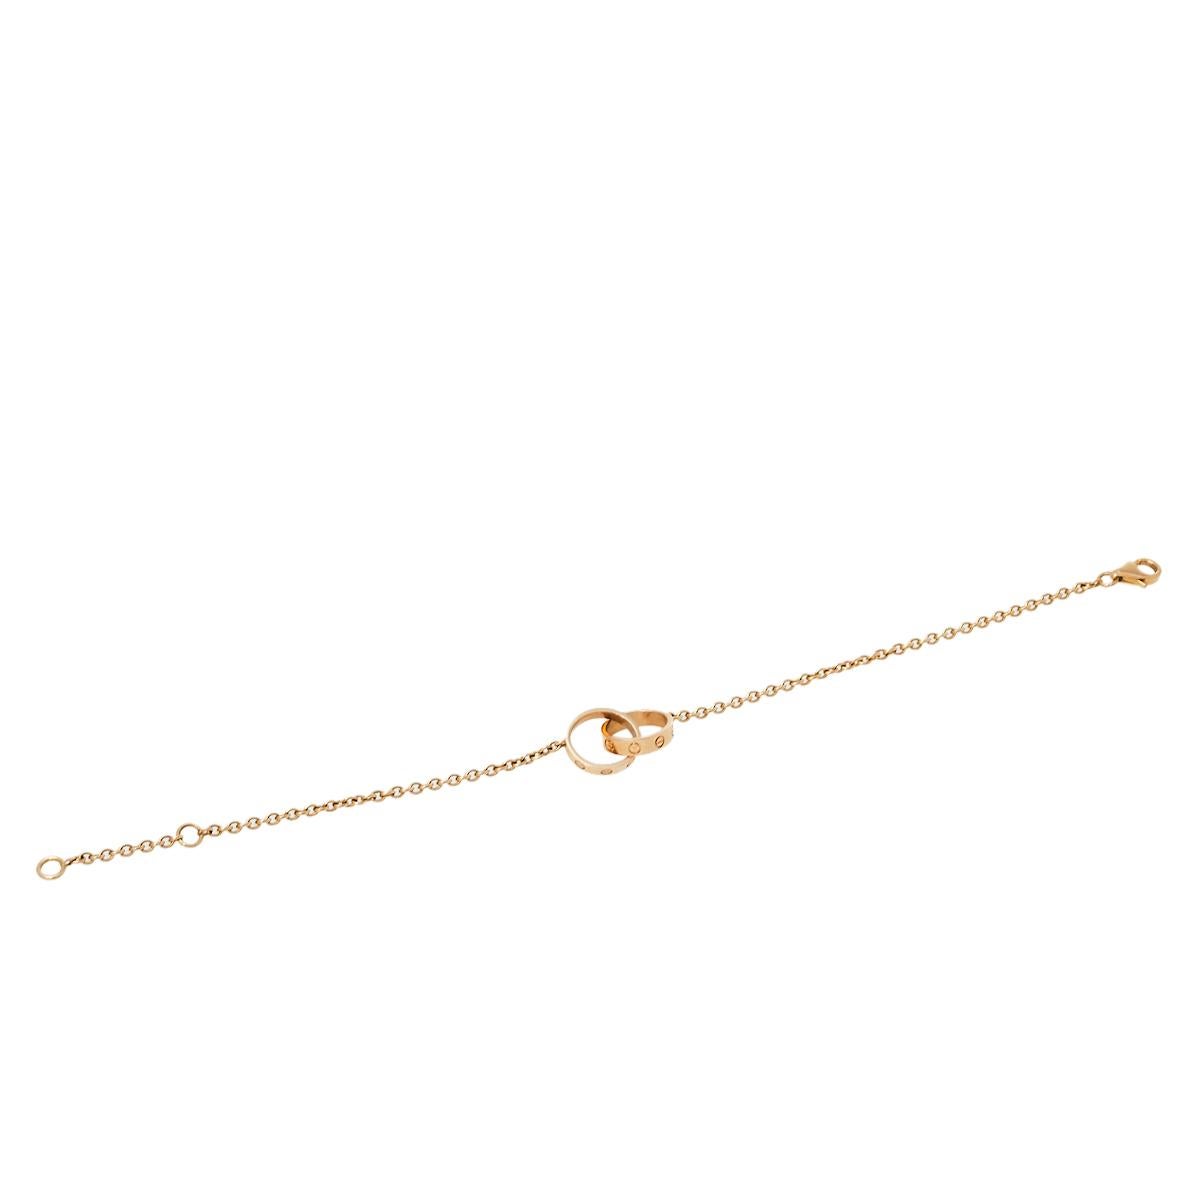 We fell in love with this Cartier Love bracelet at first glance. Look at its gorgeous yet subtle accents and picture how it will beautifully sit on your wrist and charm your peers. The 18K rose gold creation features a slender chain that carries two